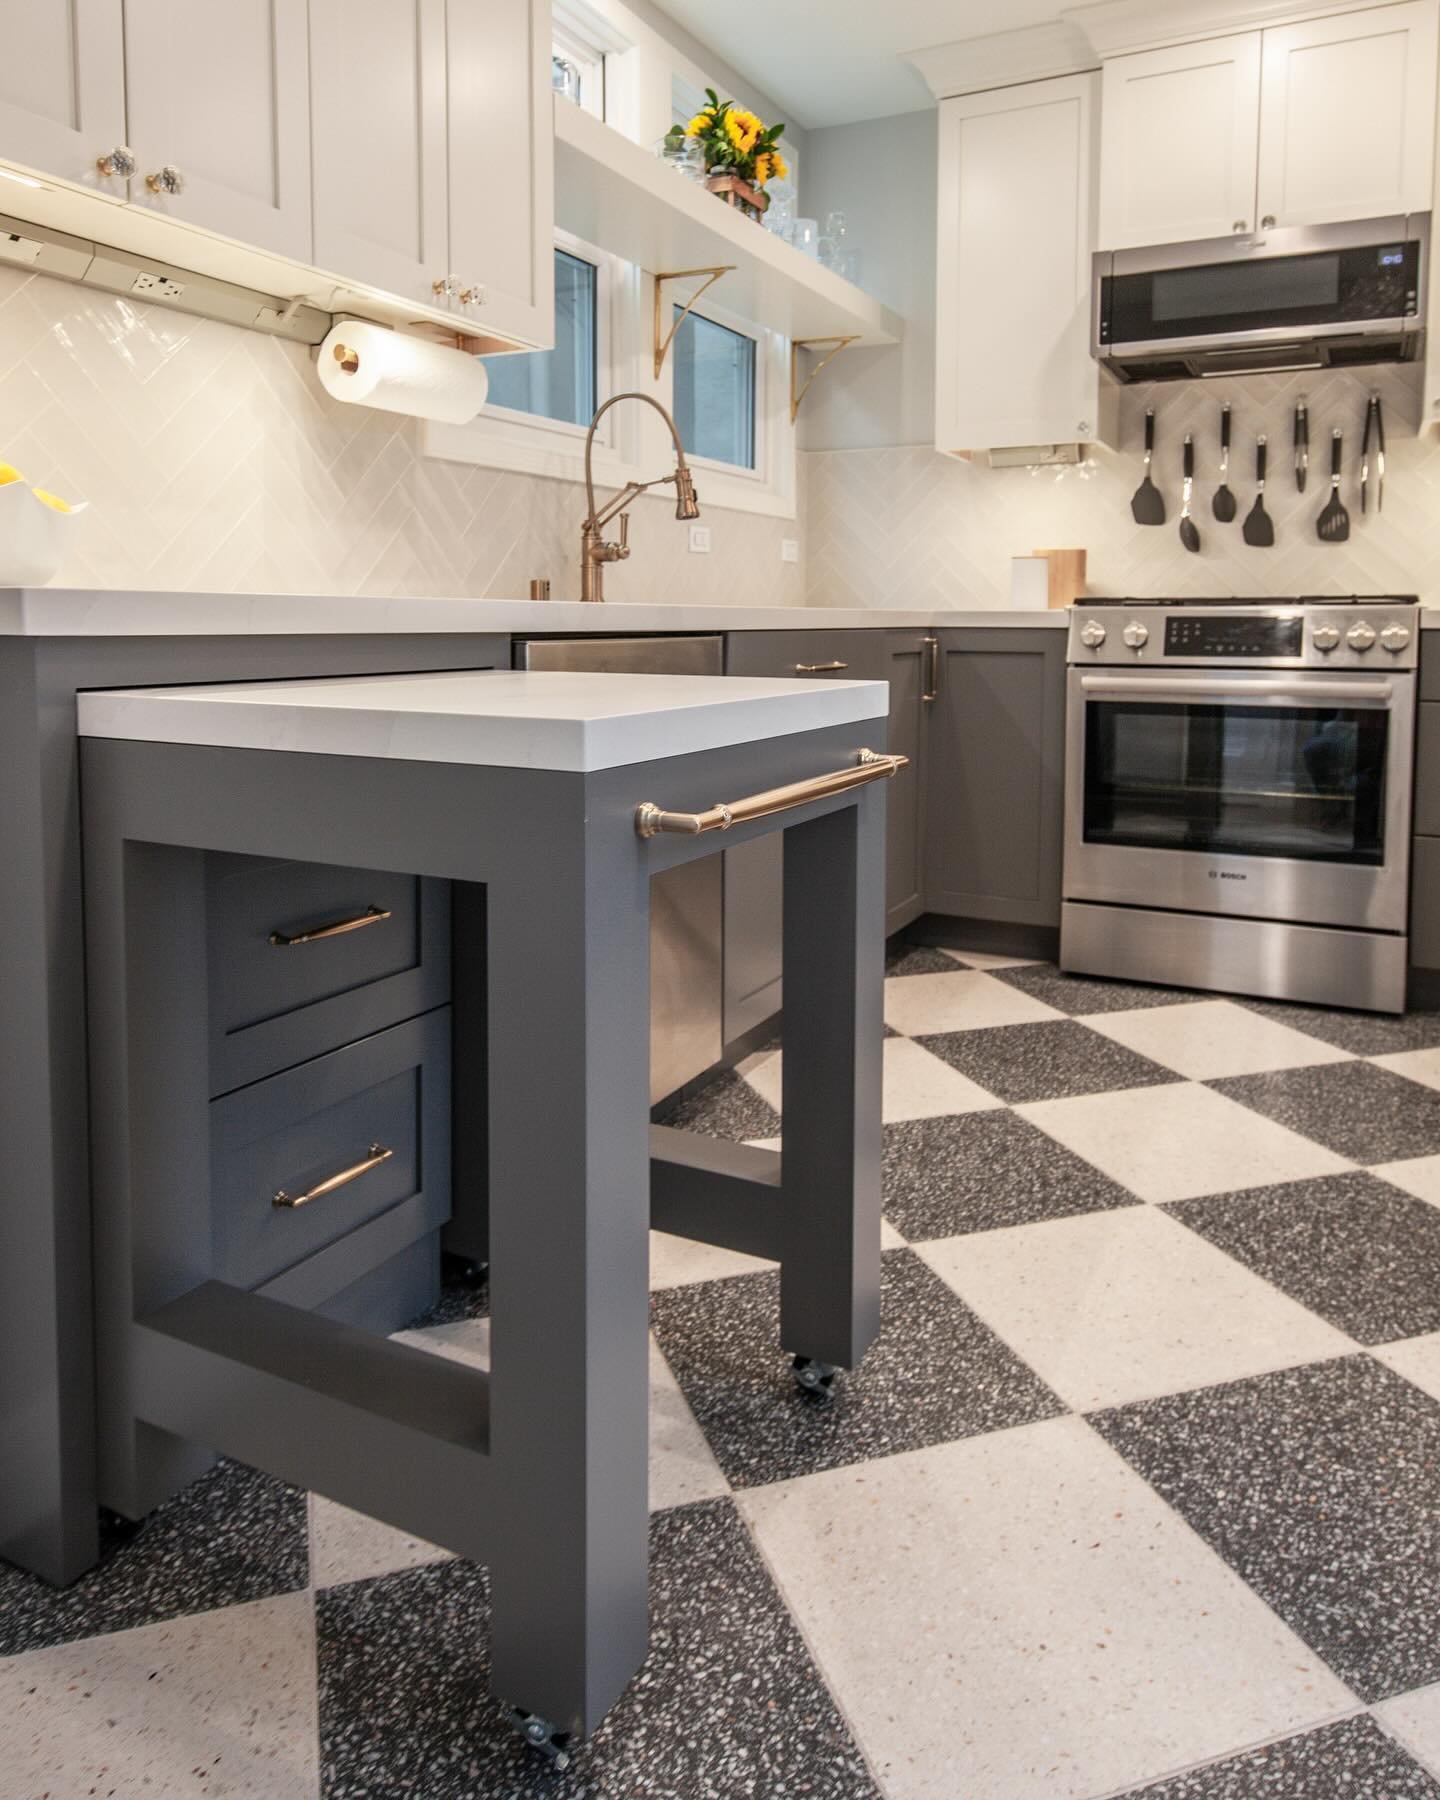 One of the coolest elements in this San Francisco kitchen is the roll-out table. It can be used for more counter space, or a spot to pull up a stool and sit. Two drawers under the table allow for a fully functional cabinet, and the large handle doubl